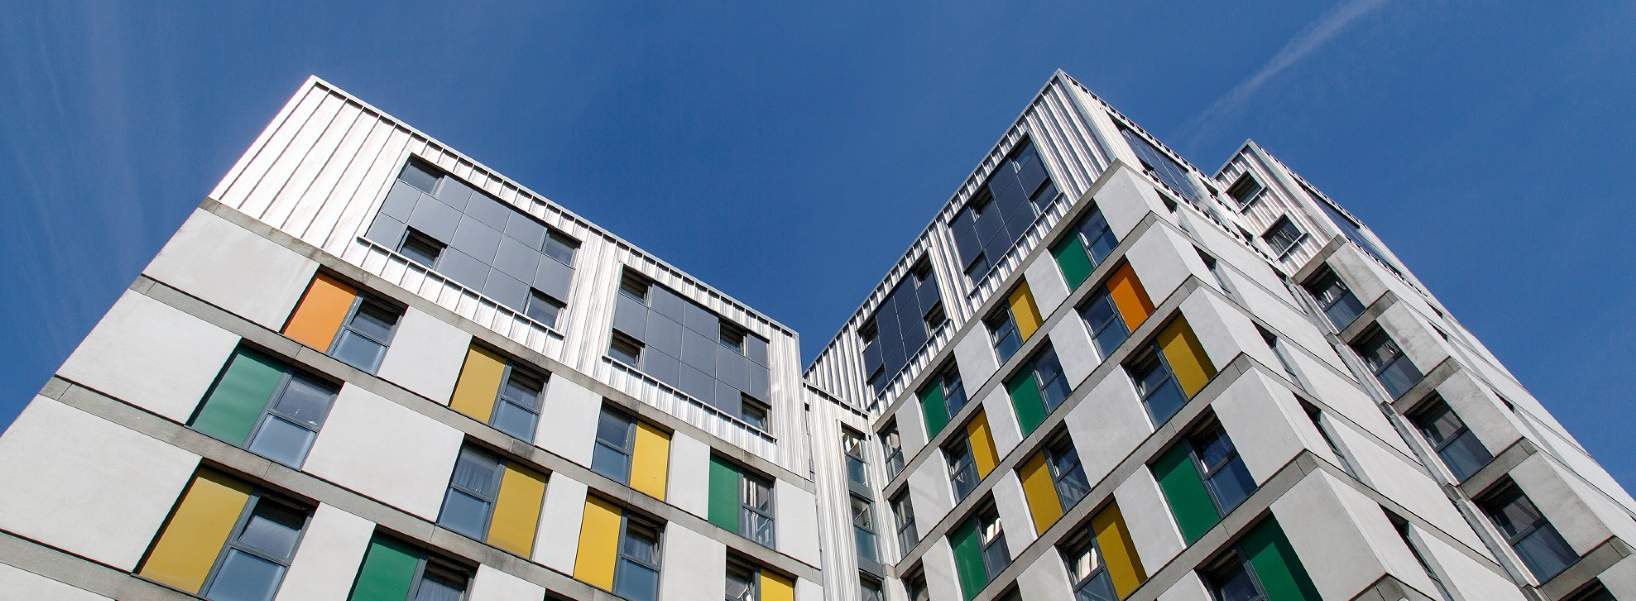 UK cities need much higher rates of student housing delivery